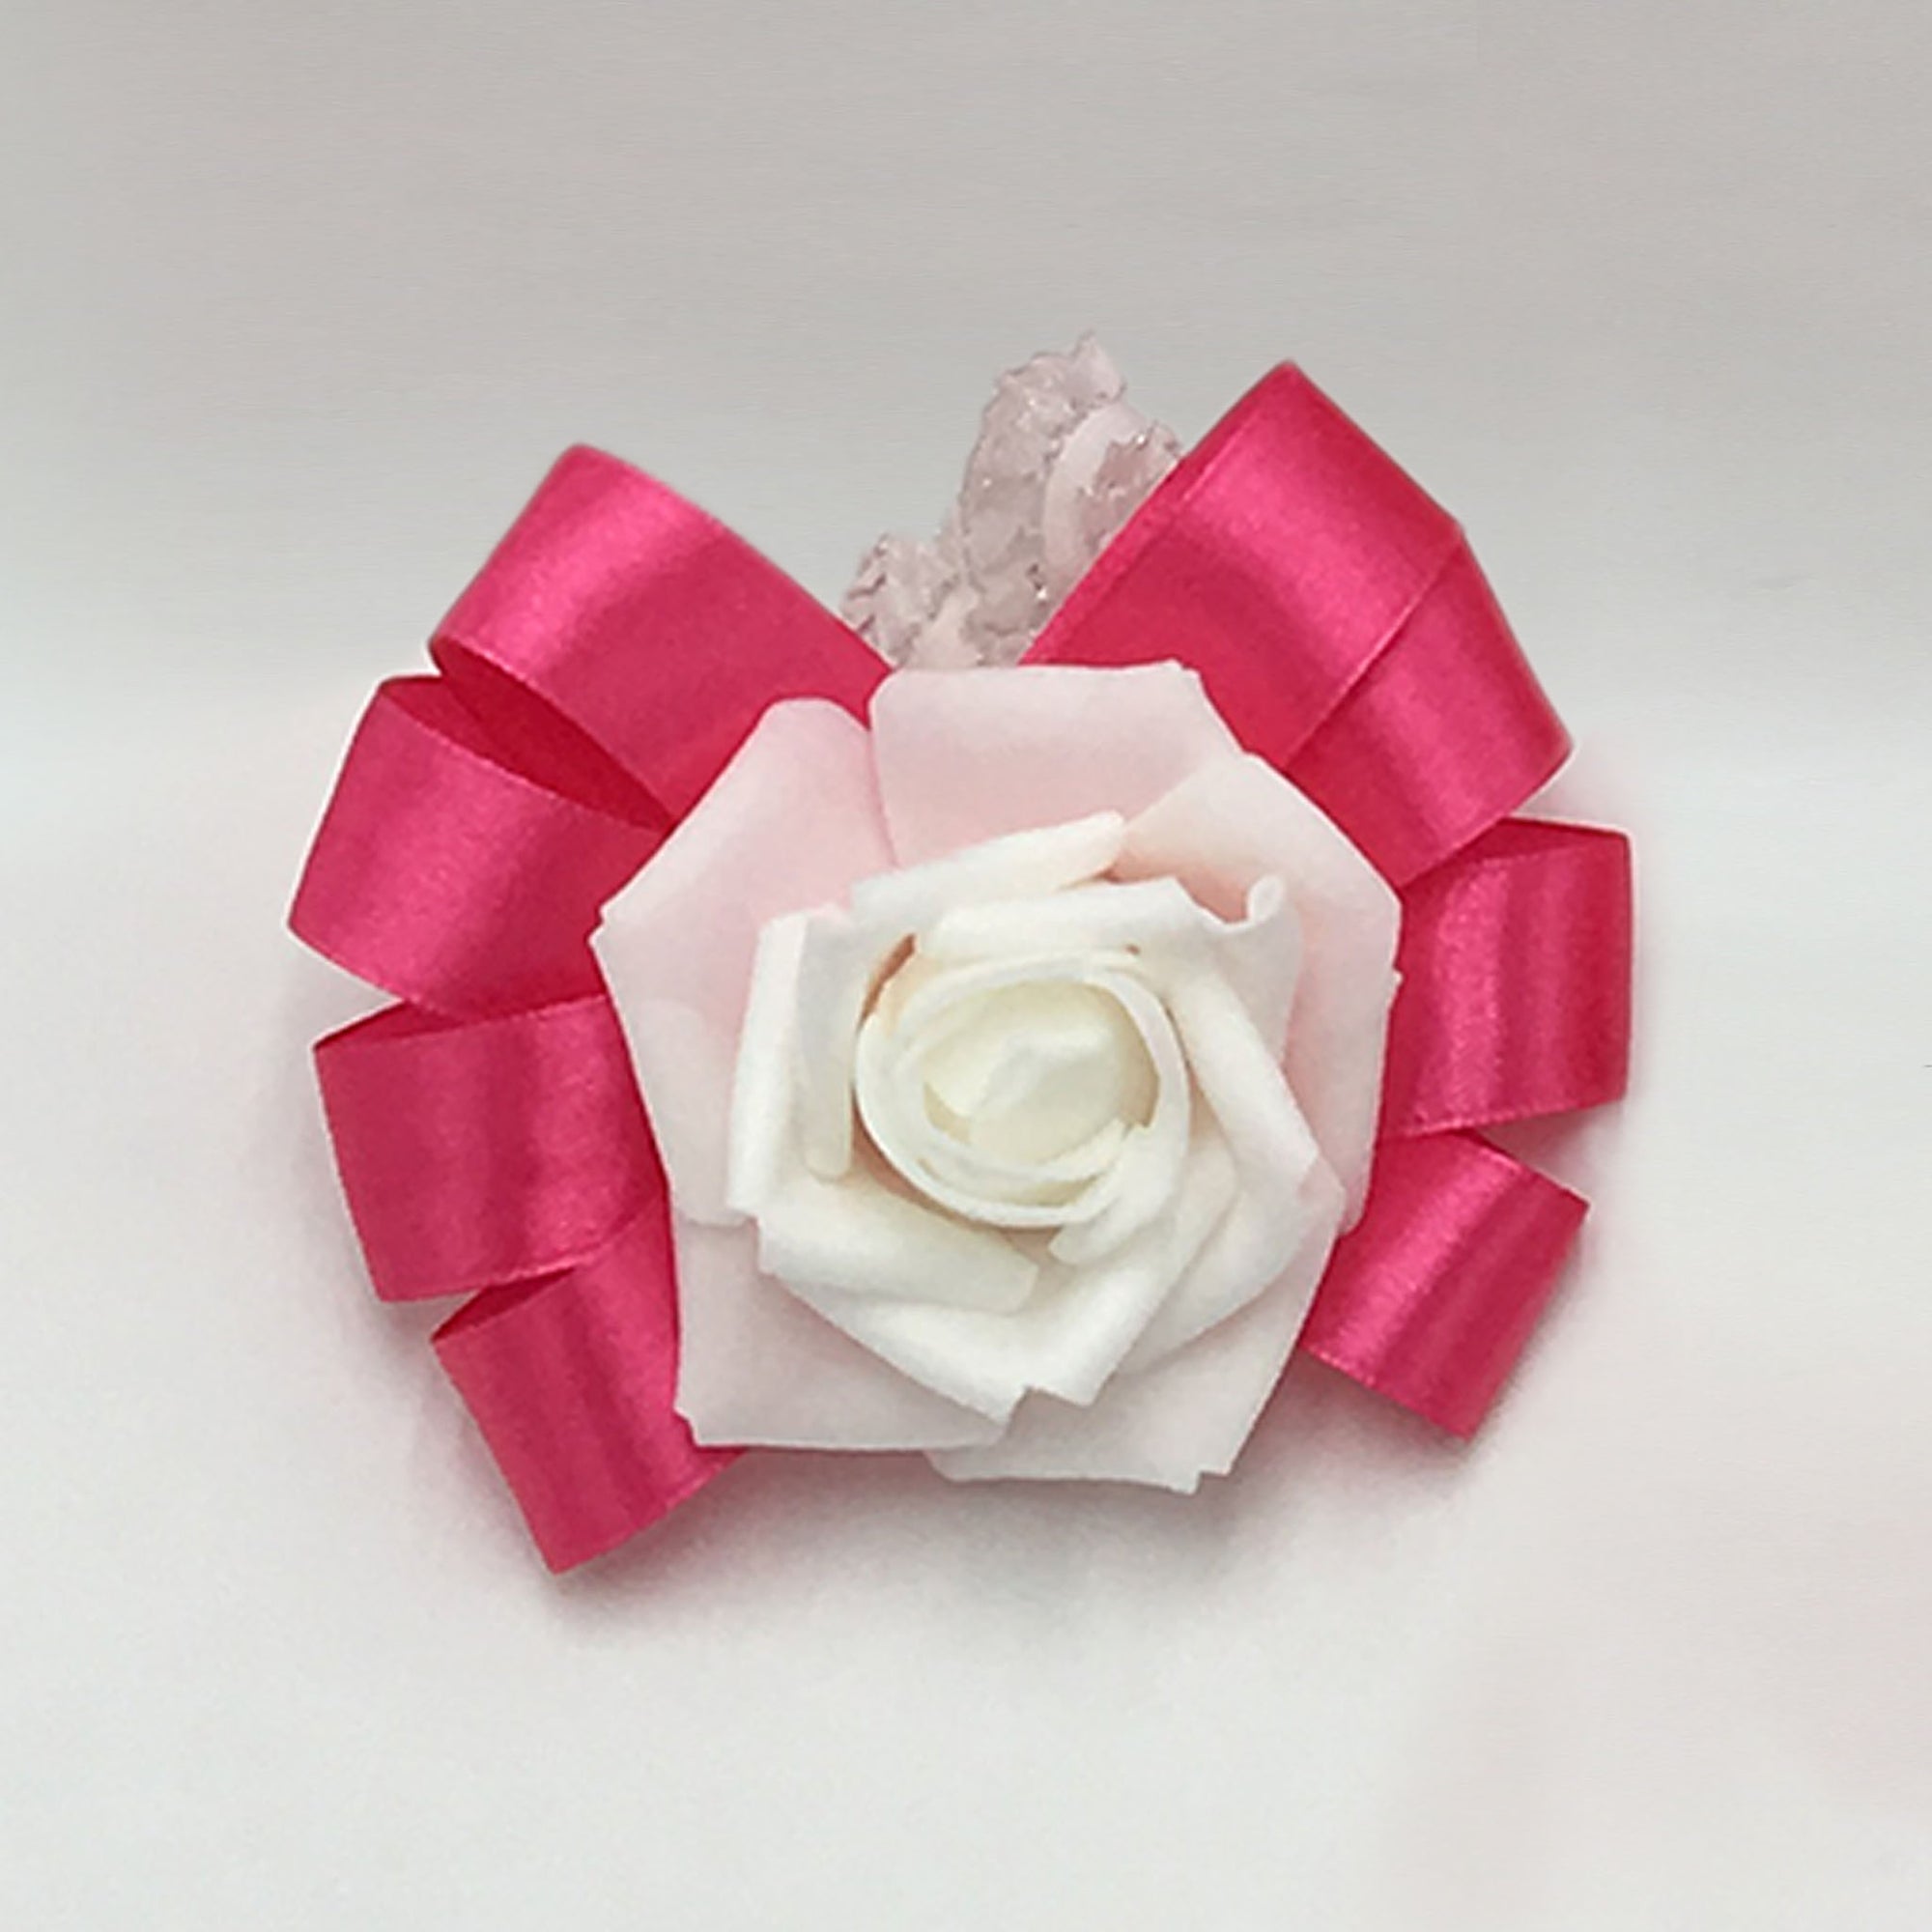 Hot Pink Bridal Bouquet White Bouquet of Rose for Bridesmaid